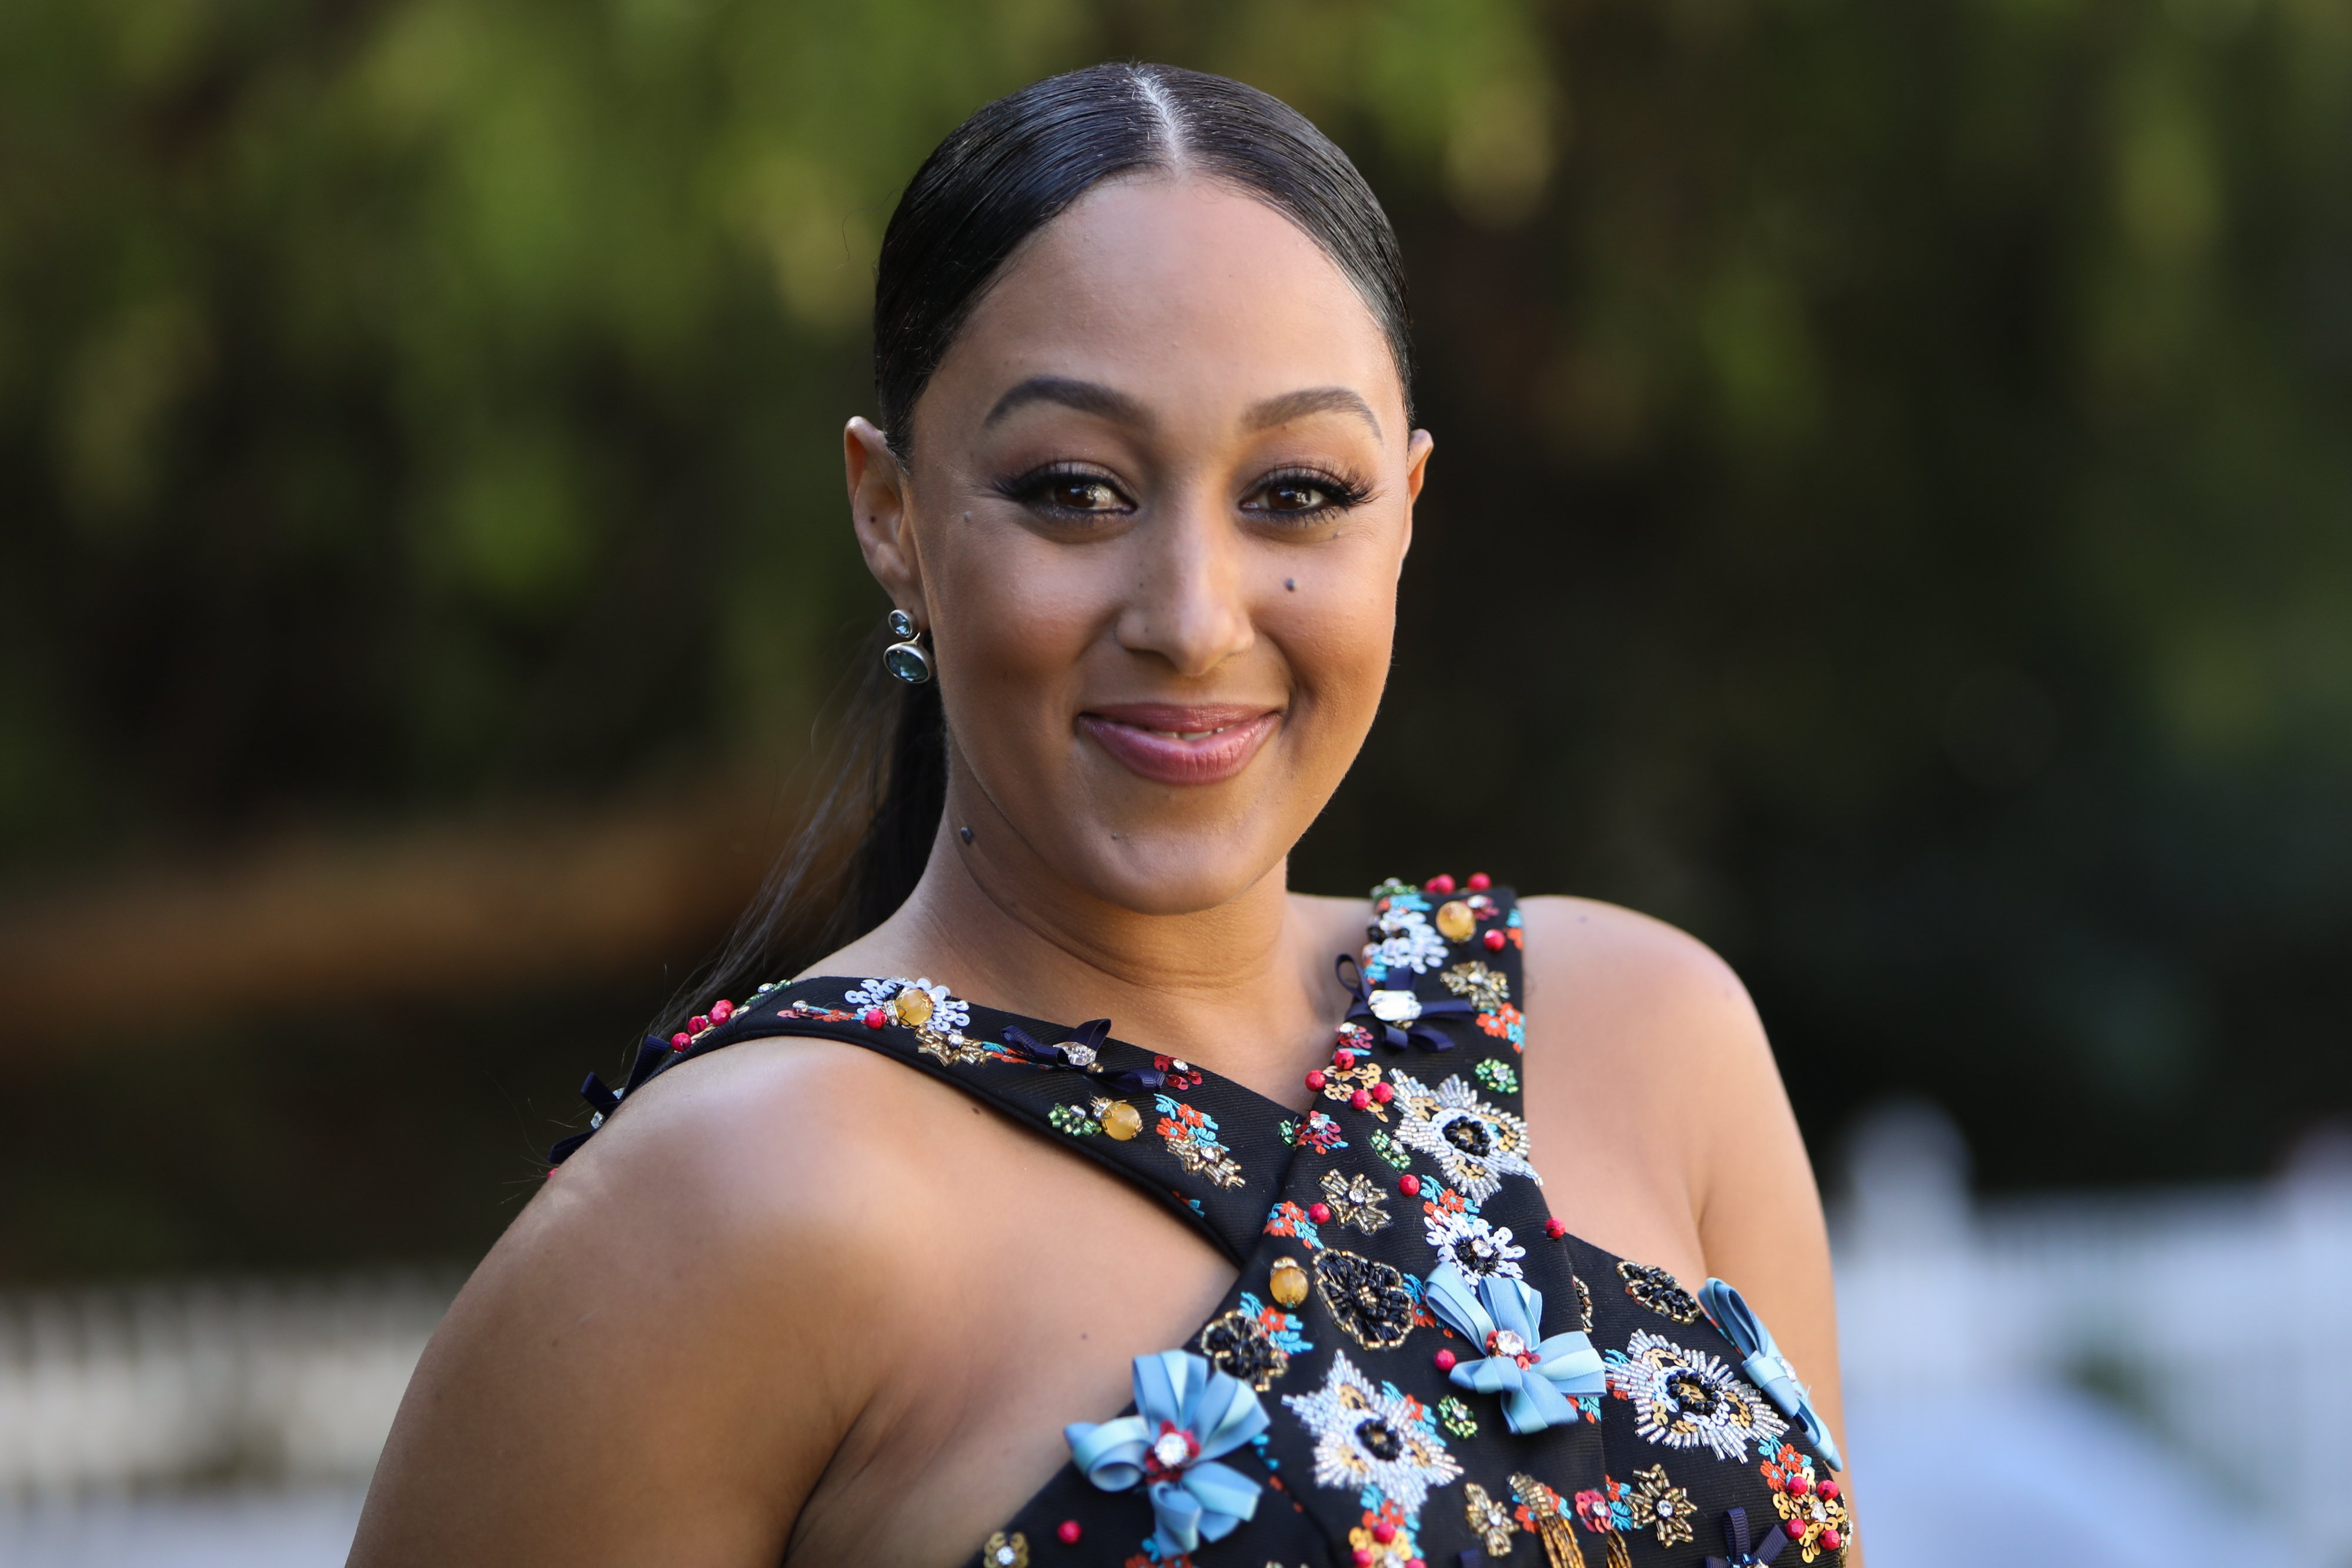 Tamera Mowry pictured at Universal Studios Hollywood on November 07, 2019 in Universal City, California | Source: Getty Images